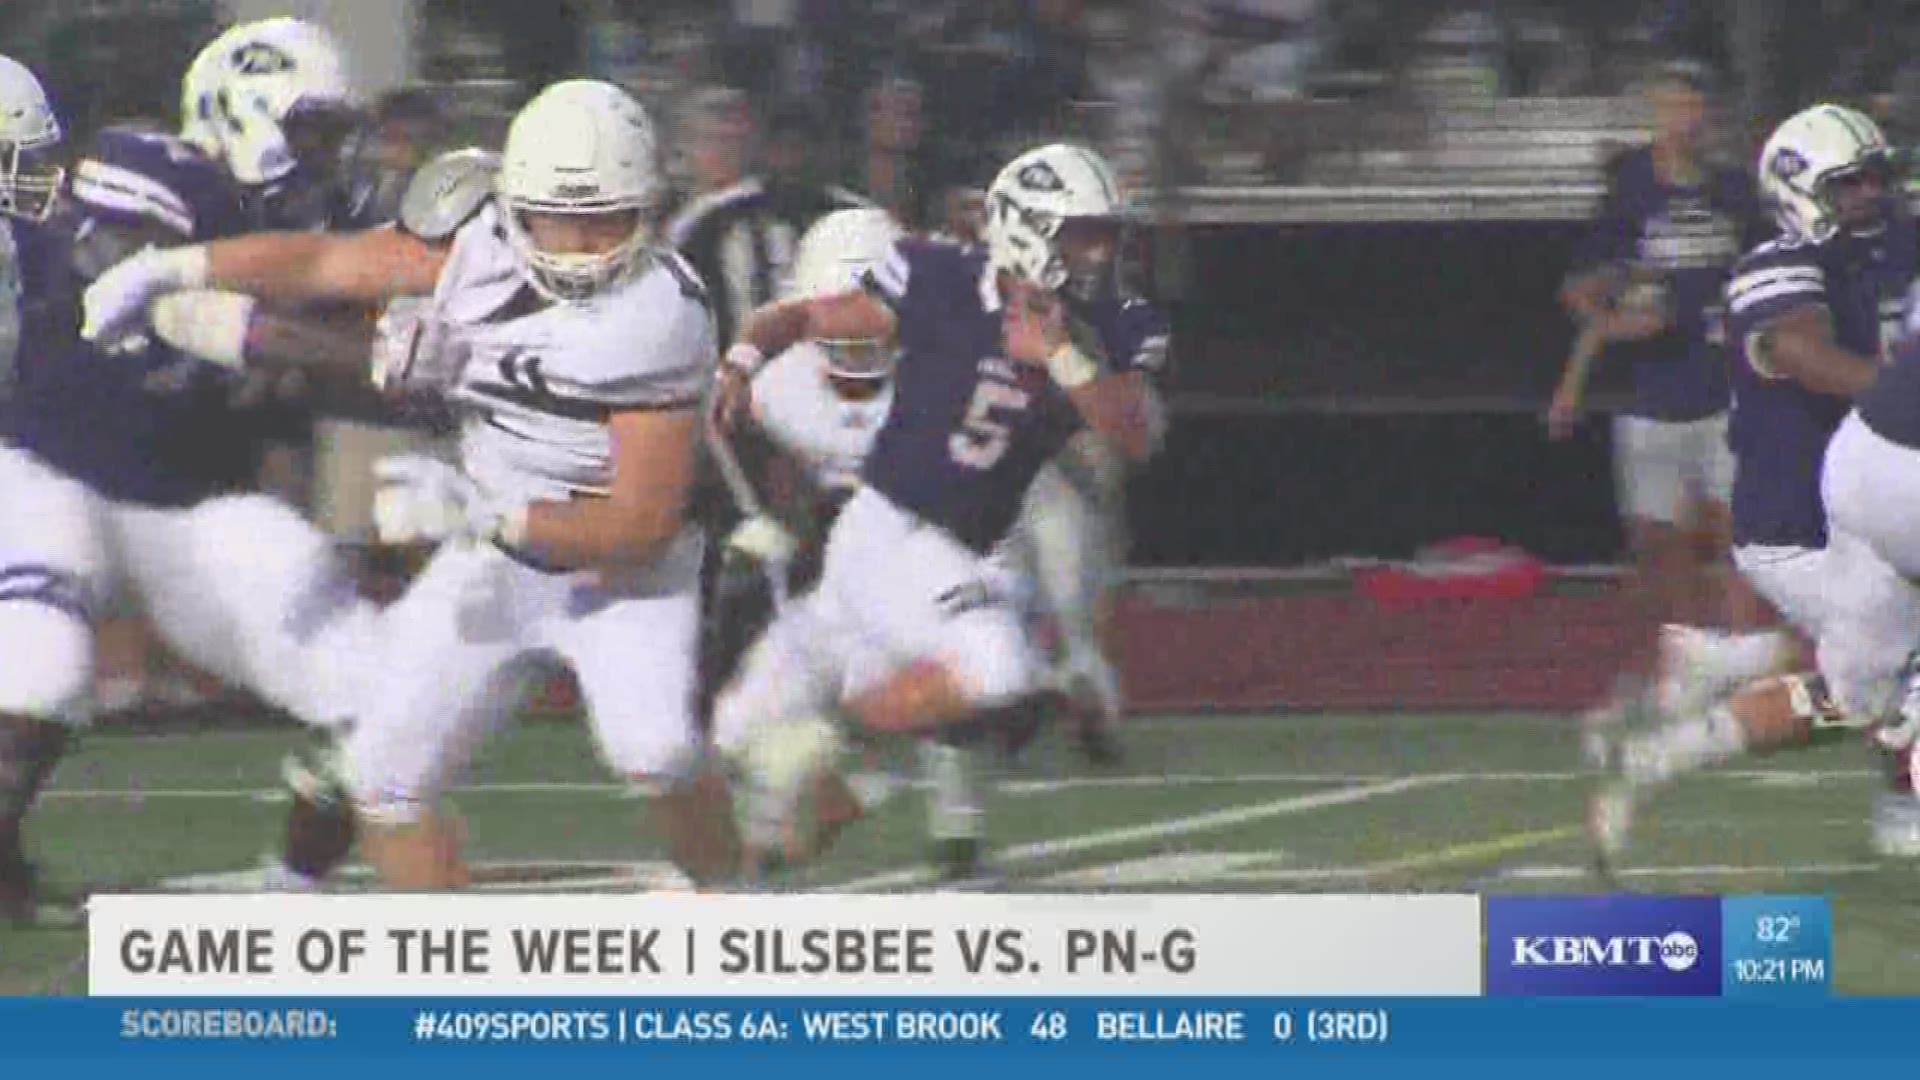 WEEK 1: PM-G beats Silsbee 14 - 48 in the 409Sports 'Game of the Week'